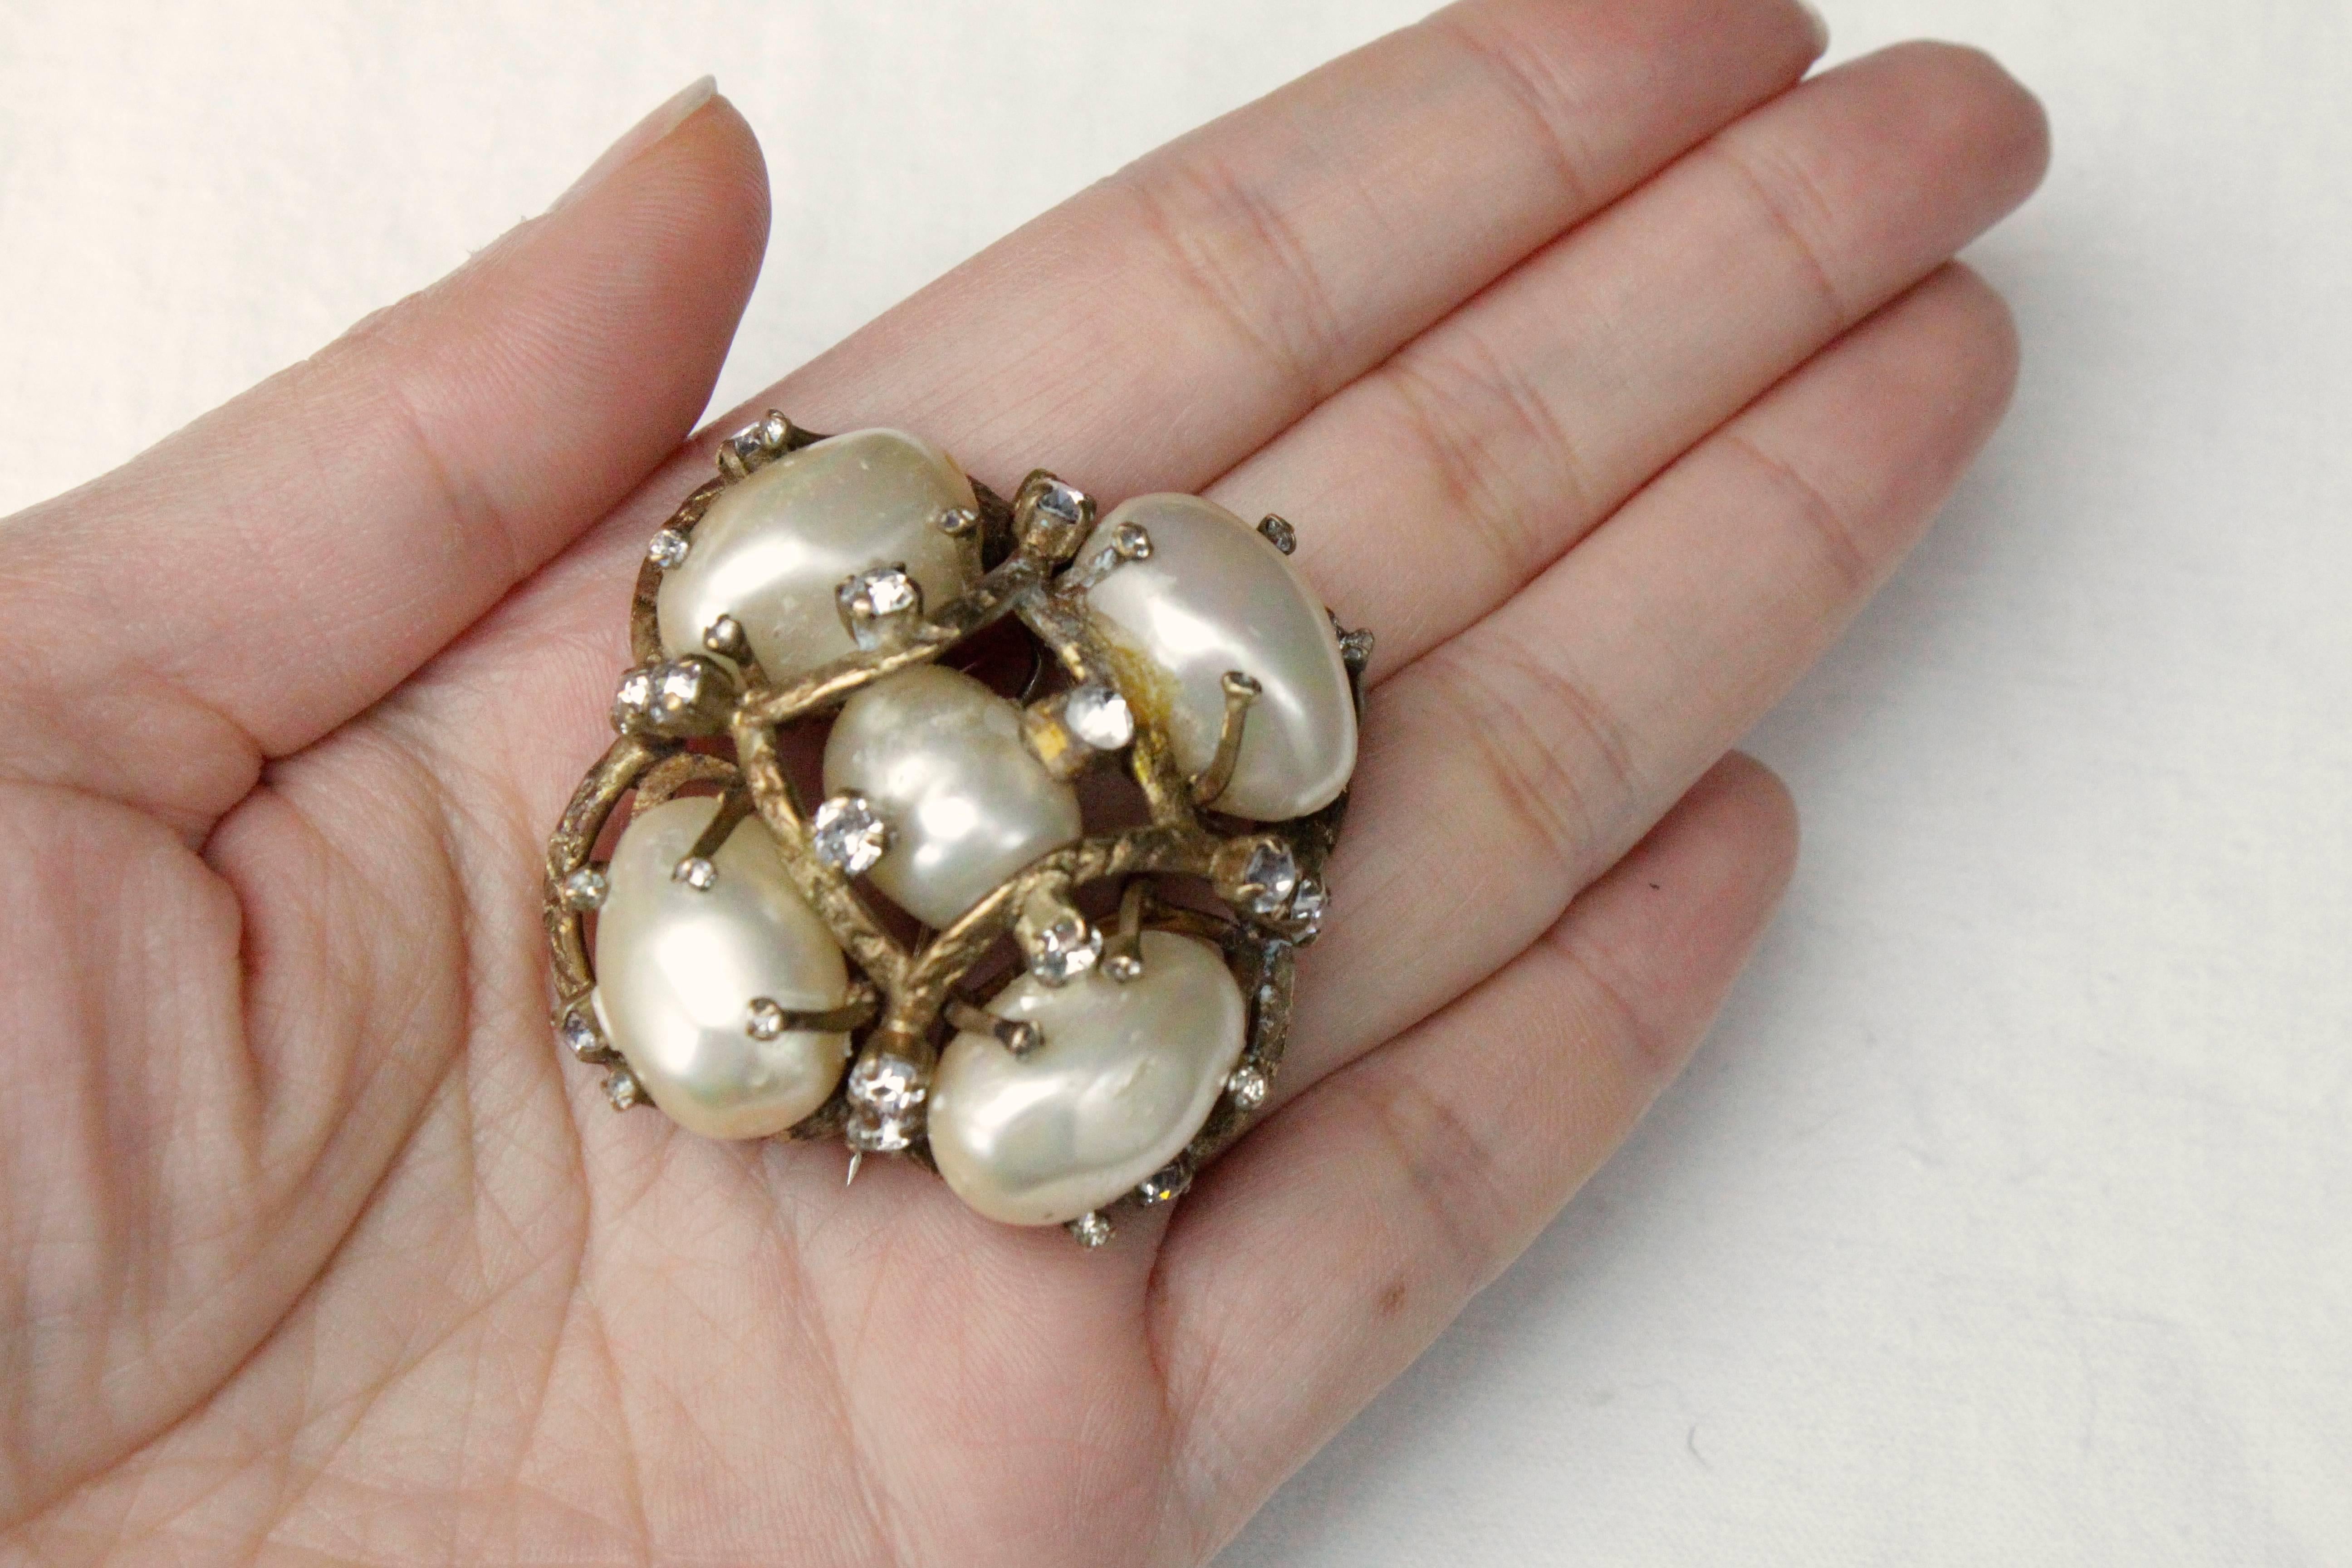 1955-1965s Chanel vintage brooch made of pearly beads and rhinestones  2